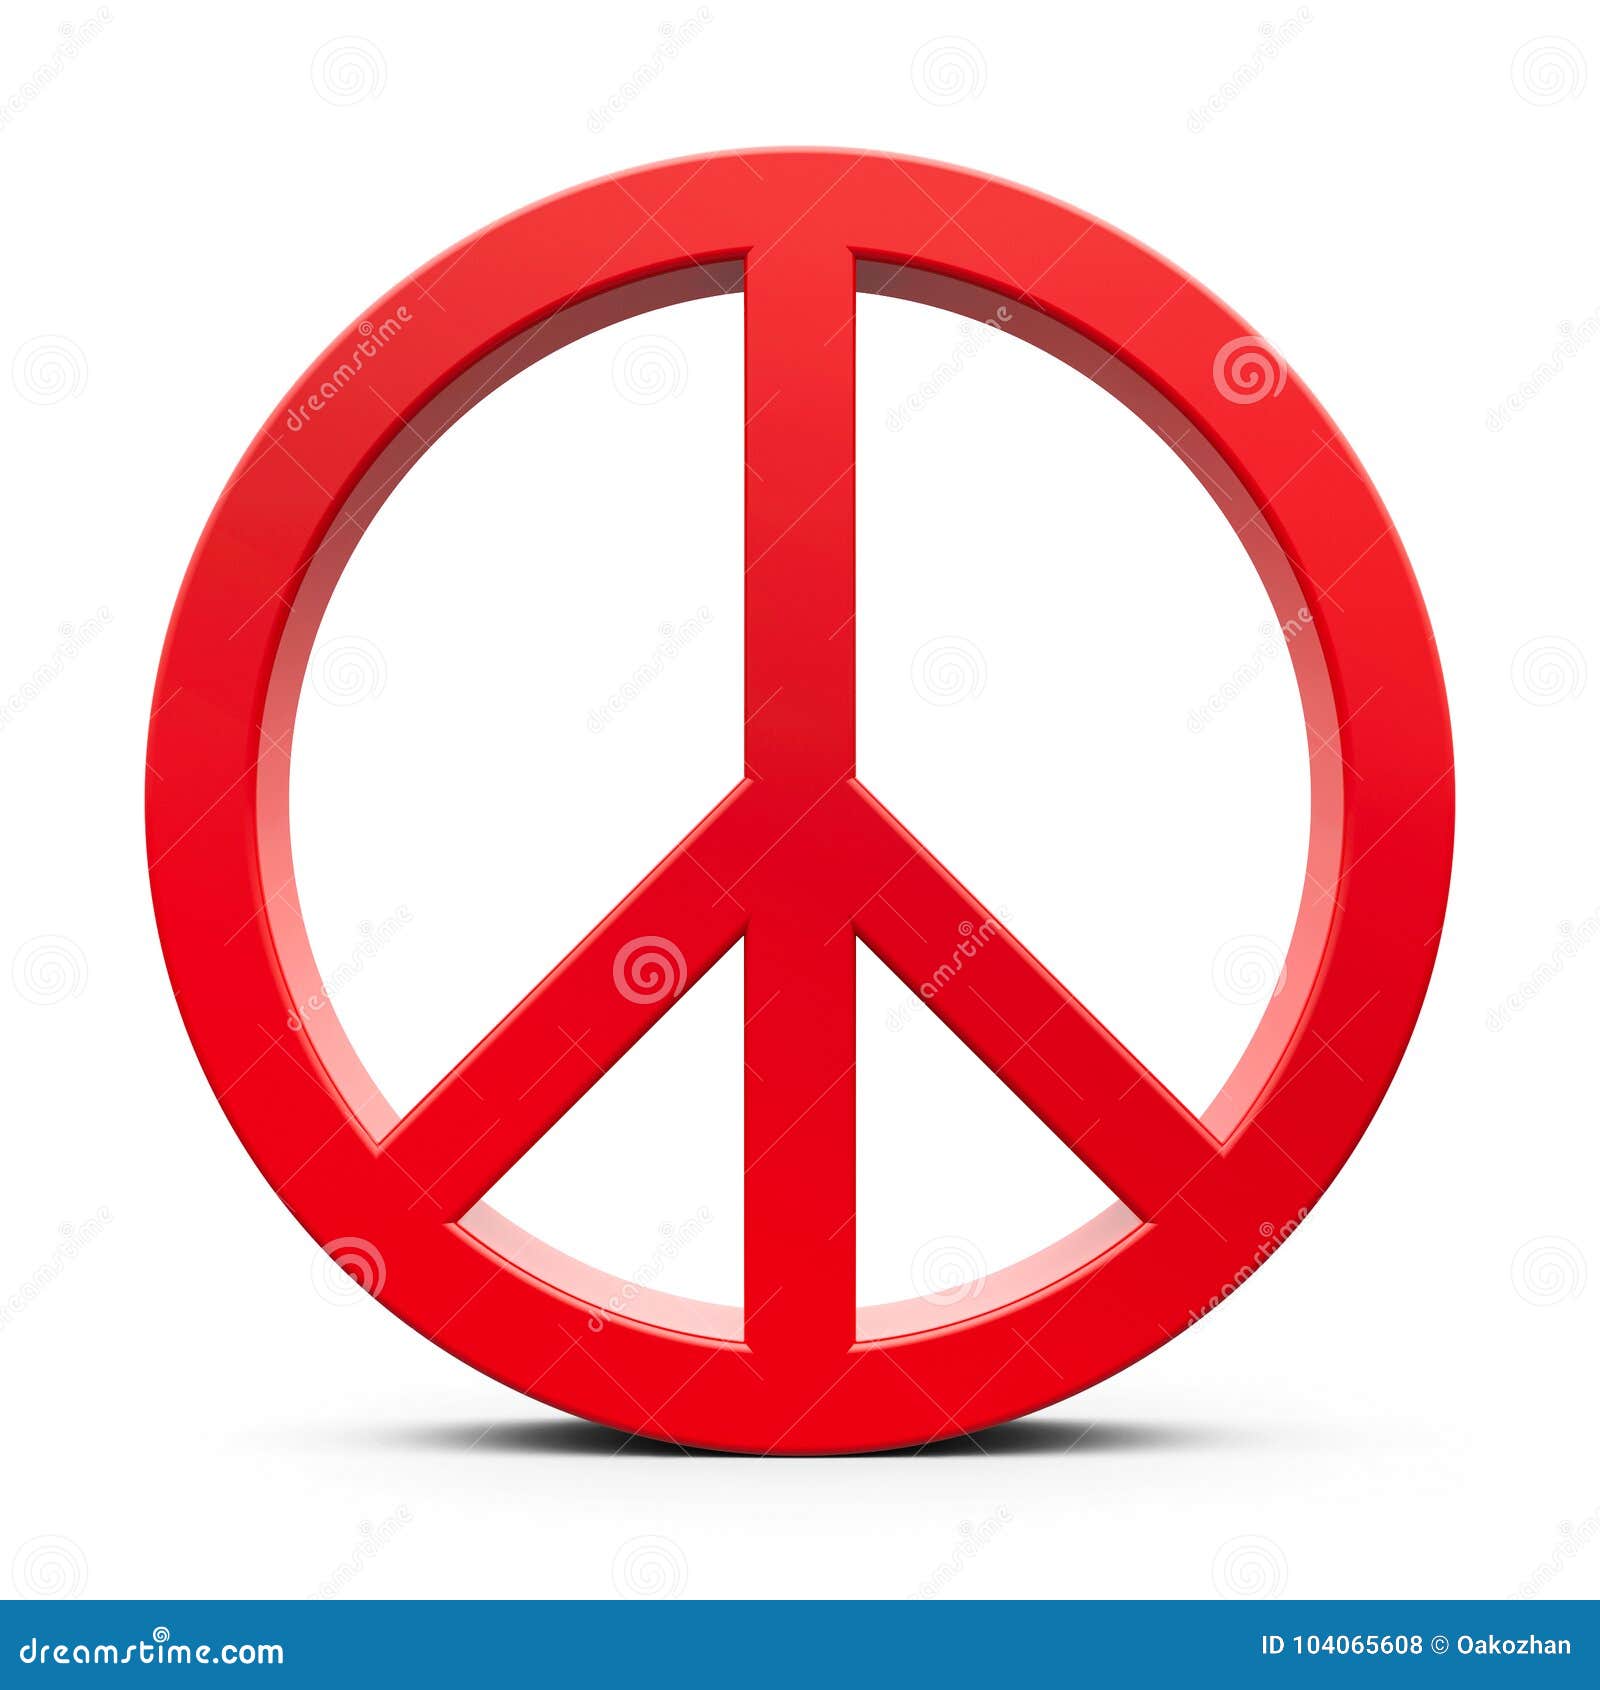 Red Peace sign stock illustration. Illustration of peace - 104065608